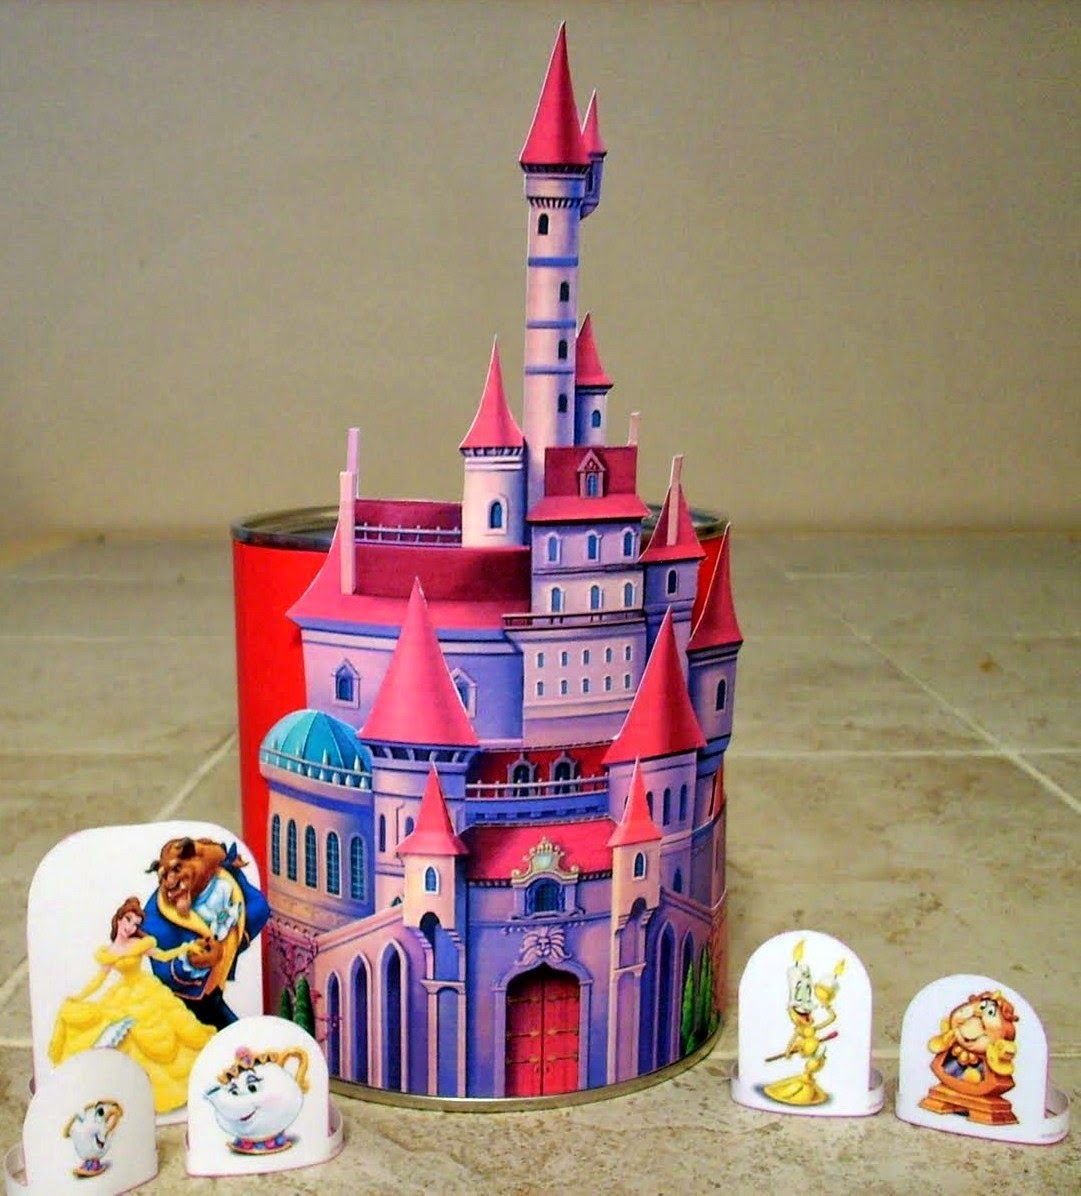 Papercraft Cake is It for Parties is It Free is It Cute Has Quality It´s Here